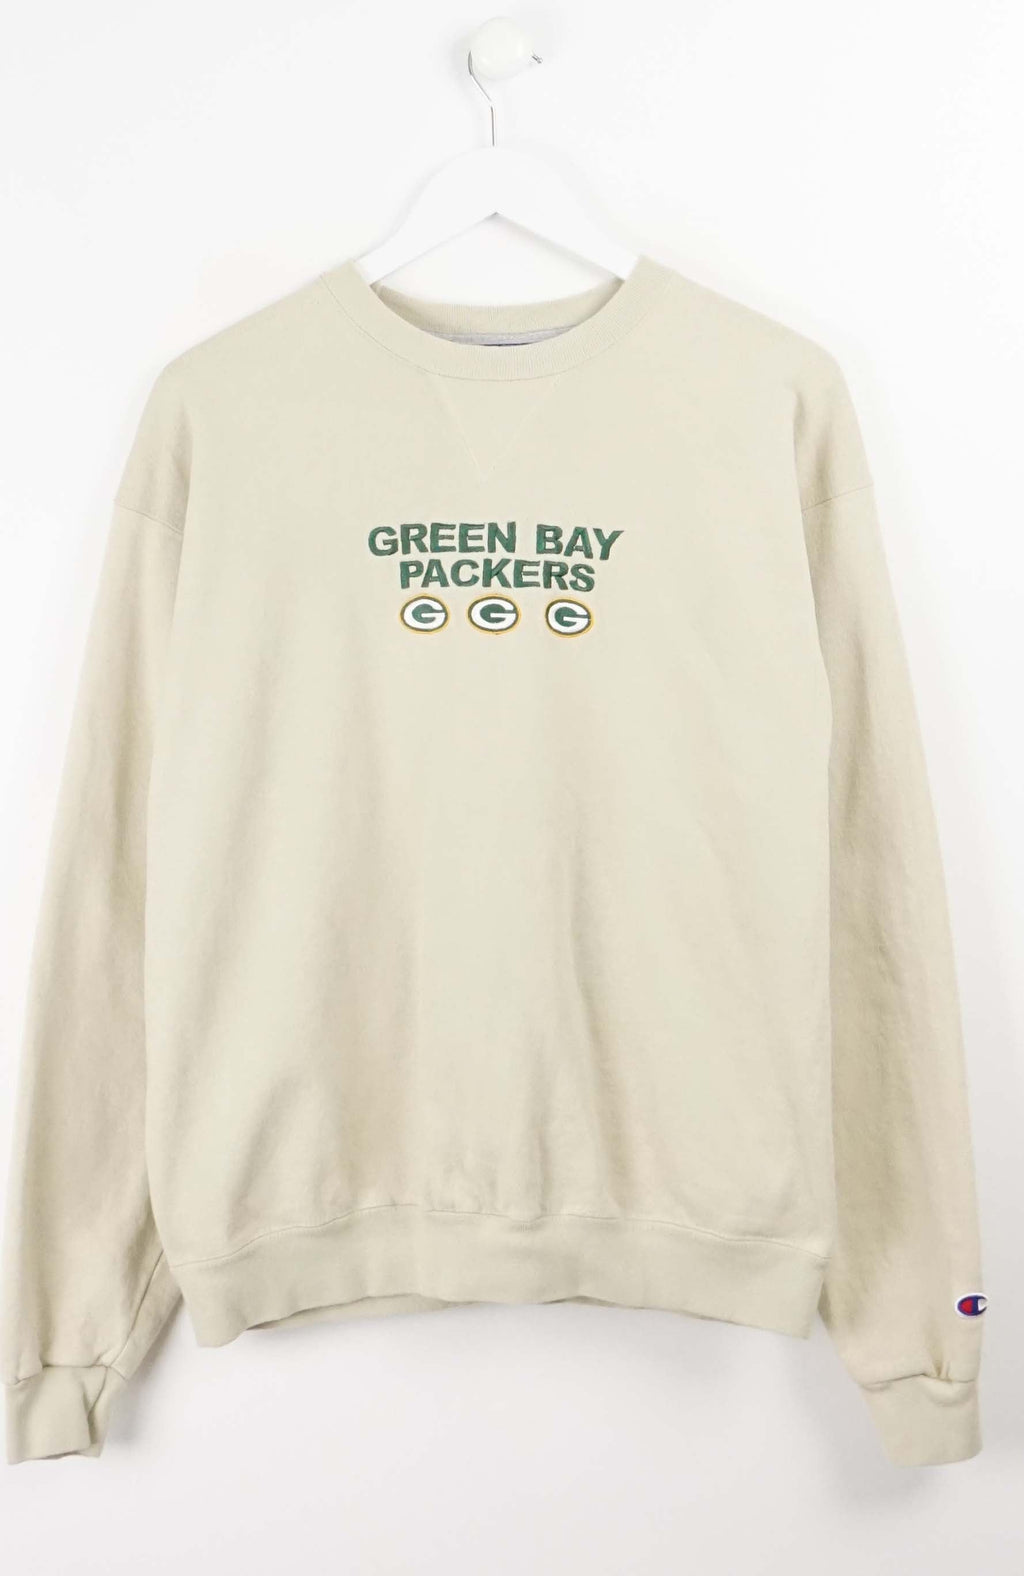  VINTAGE CHAMPION GREEN BAY PACKERS SWEATER (M)